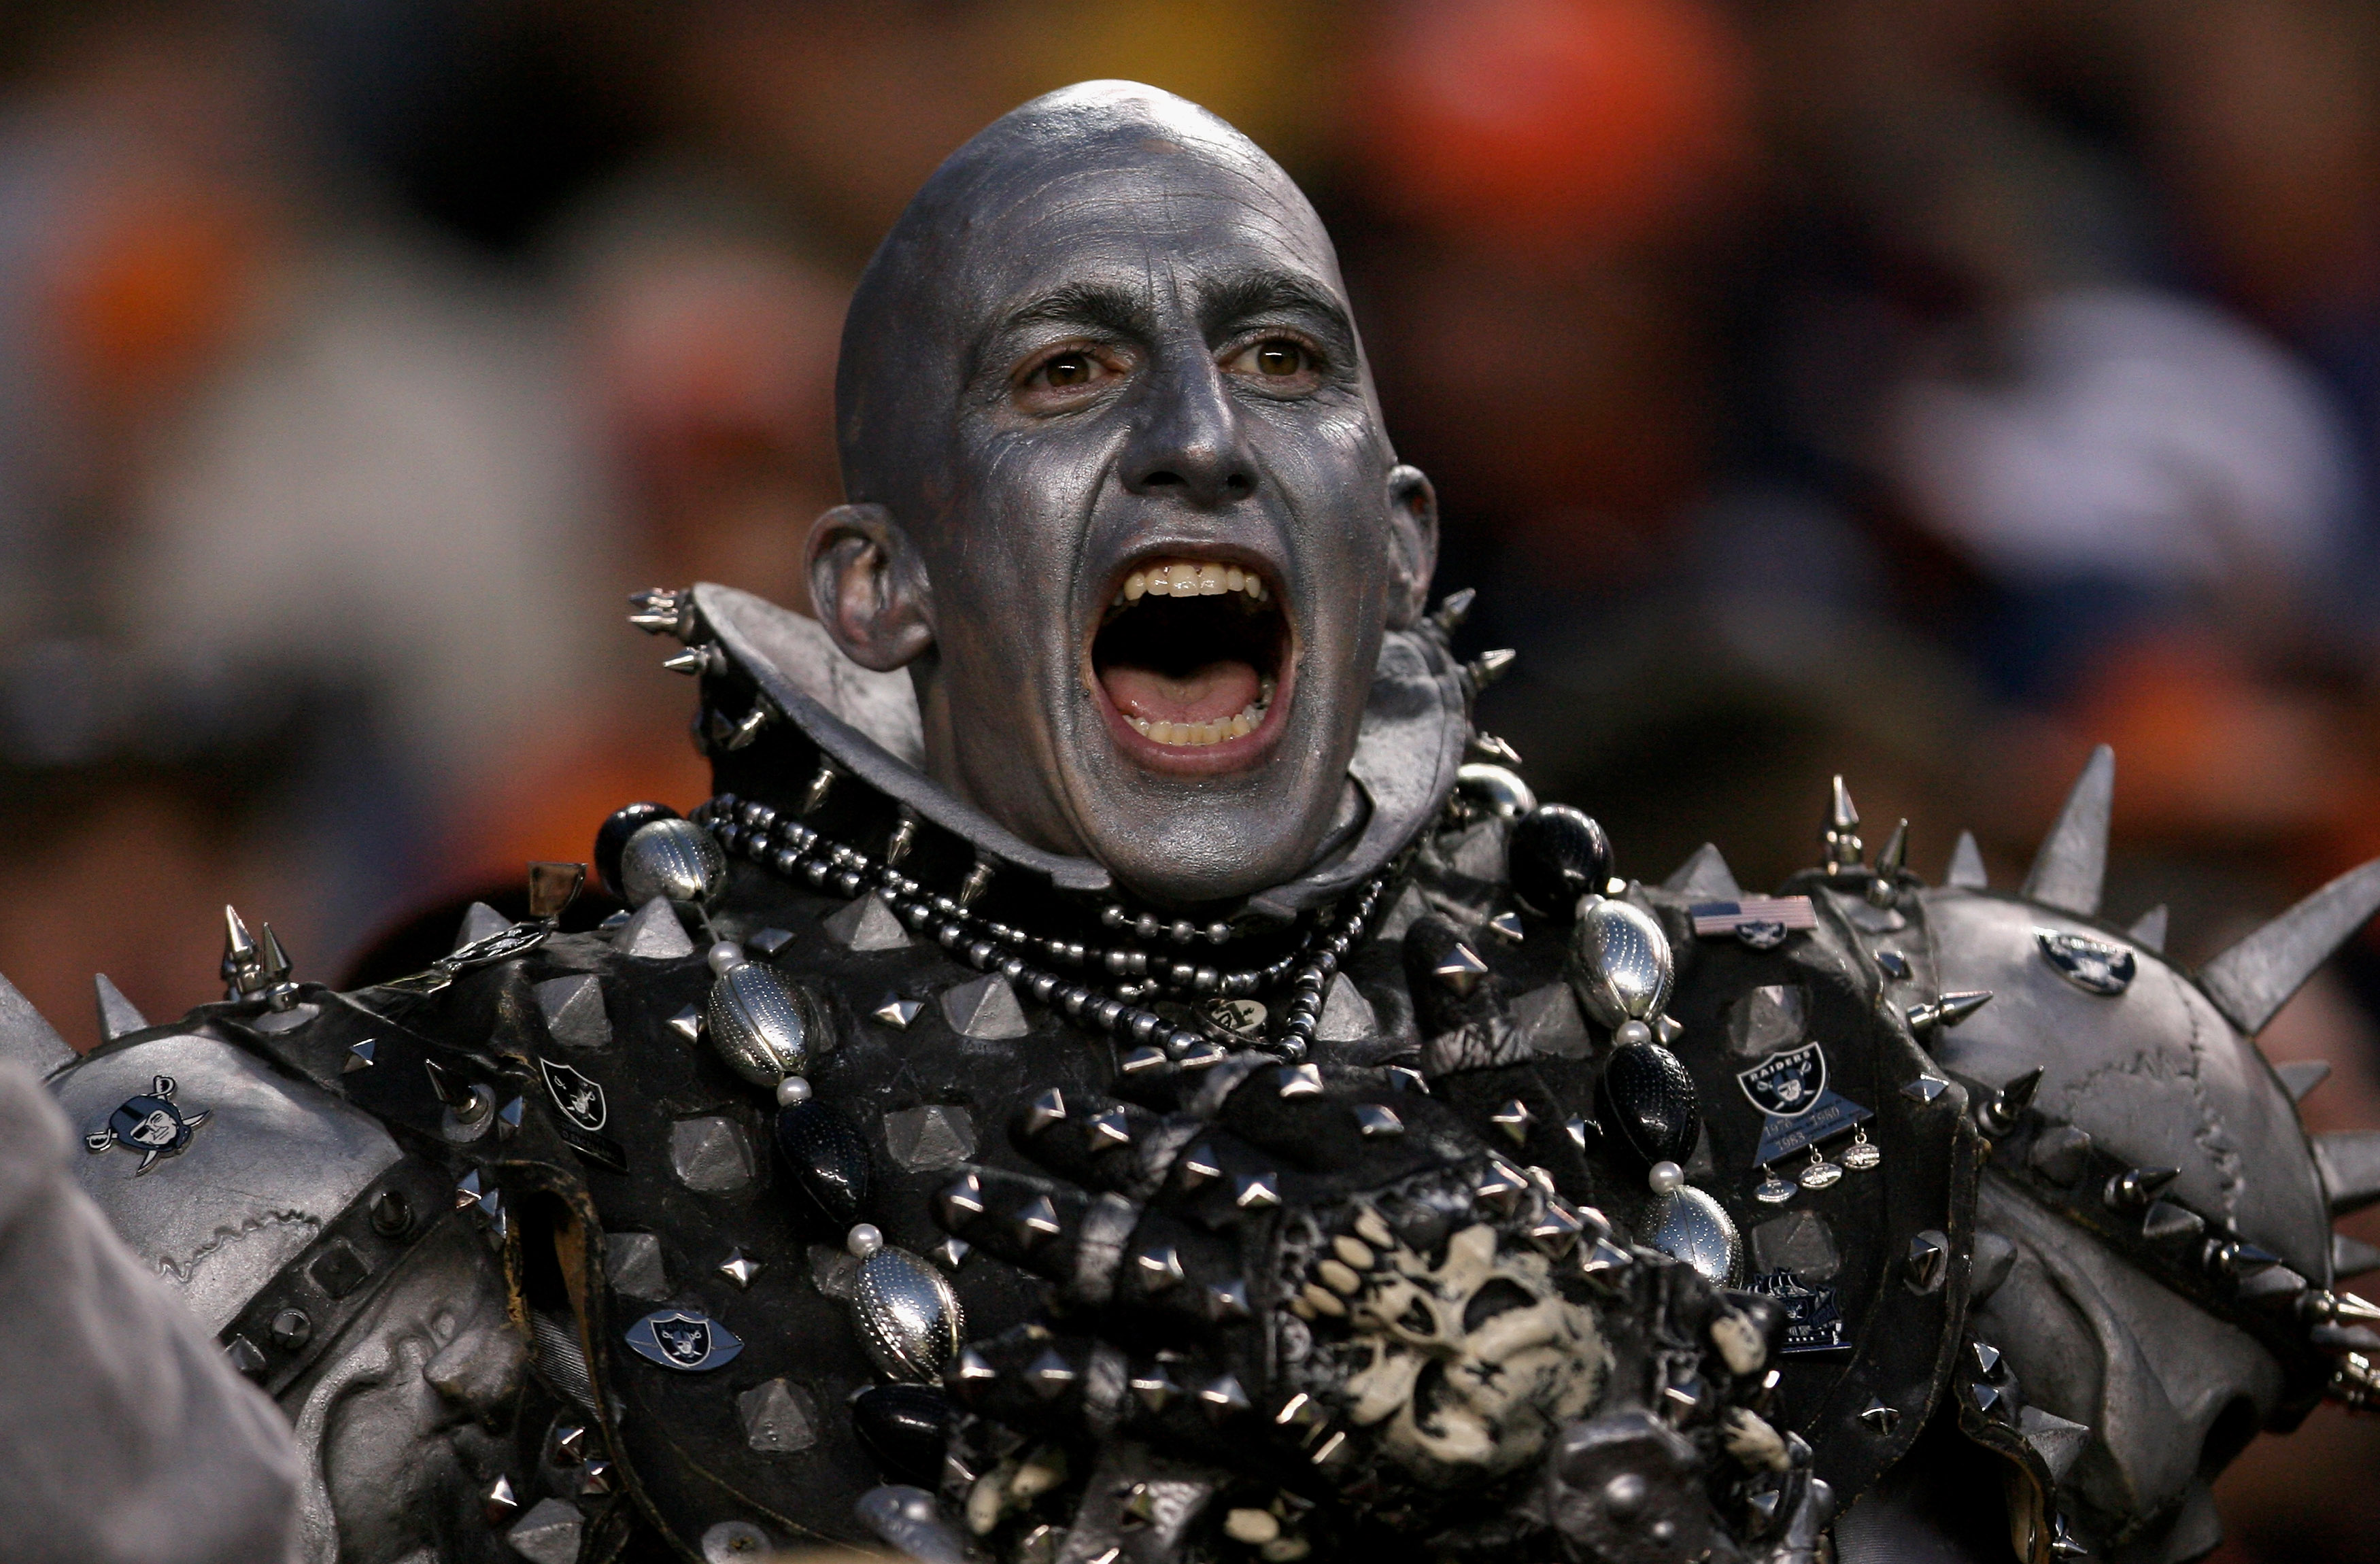 DENVER - NOVEMBER 23:  A member of Raider Nation shows his support of the Oakland Raiders as they faced the Denver Broncos during week 12 NFL action at Invesco Field at Mile High on November 23, 2008 in Denver, Colorado. The Raiders defeated the Broncos 3